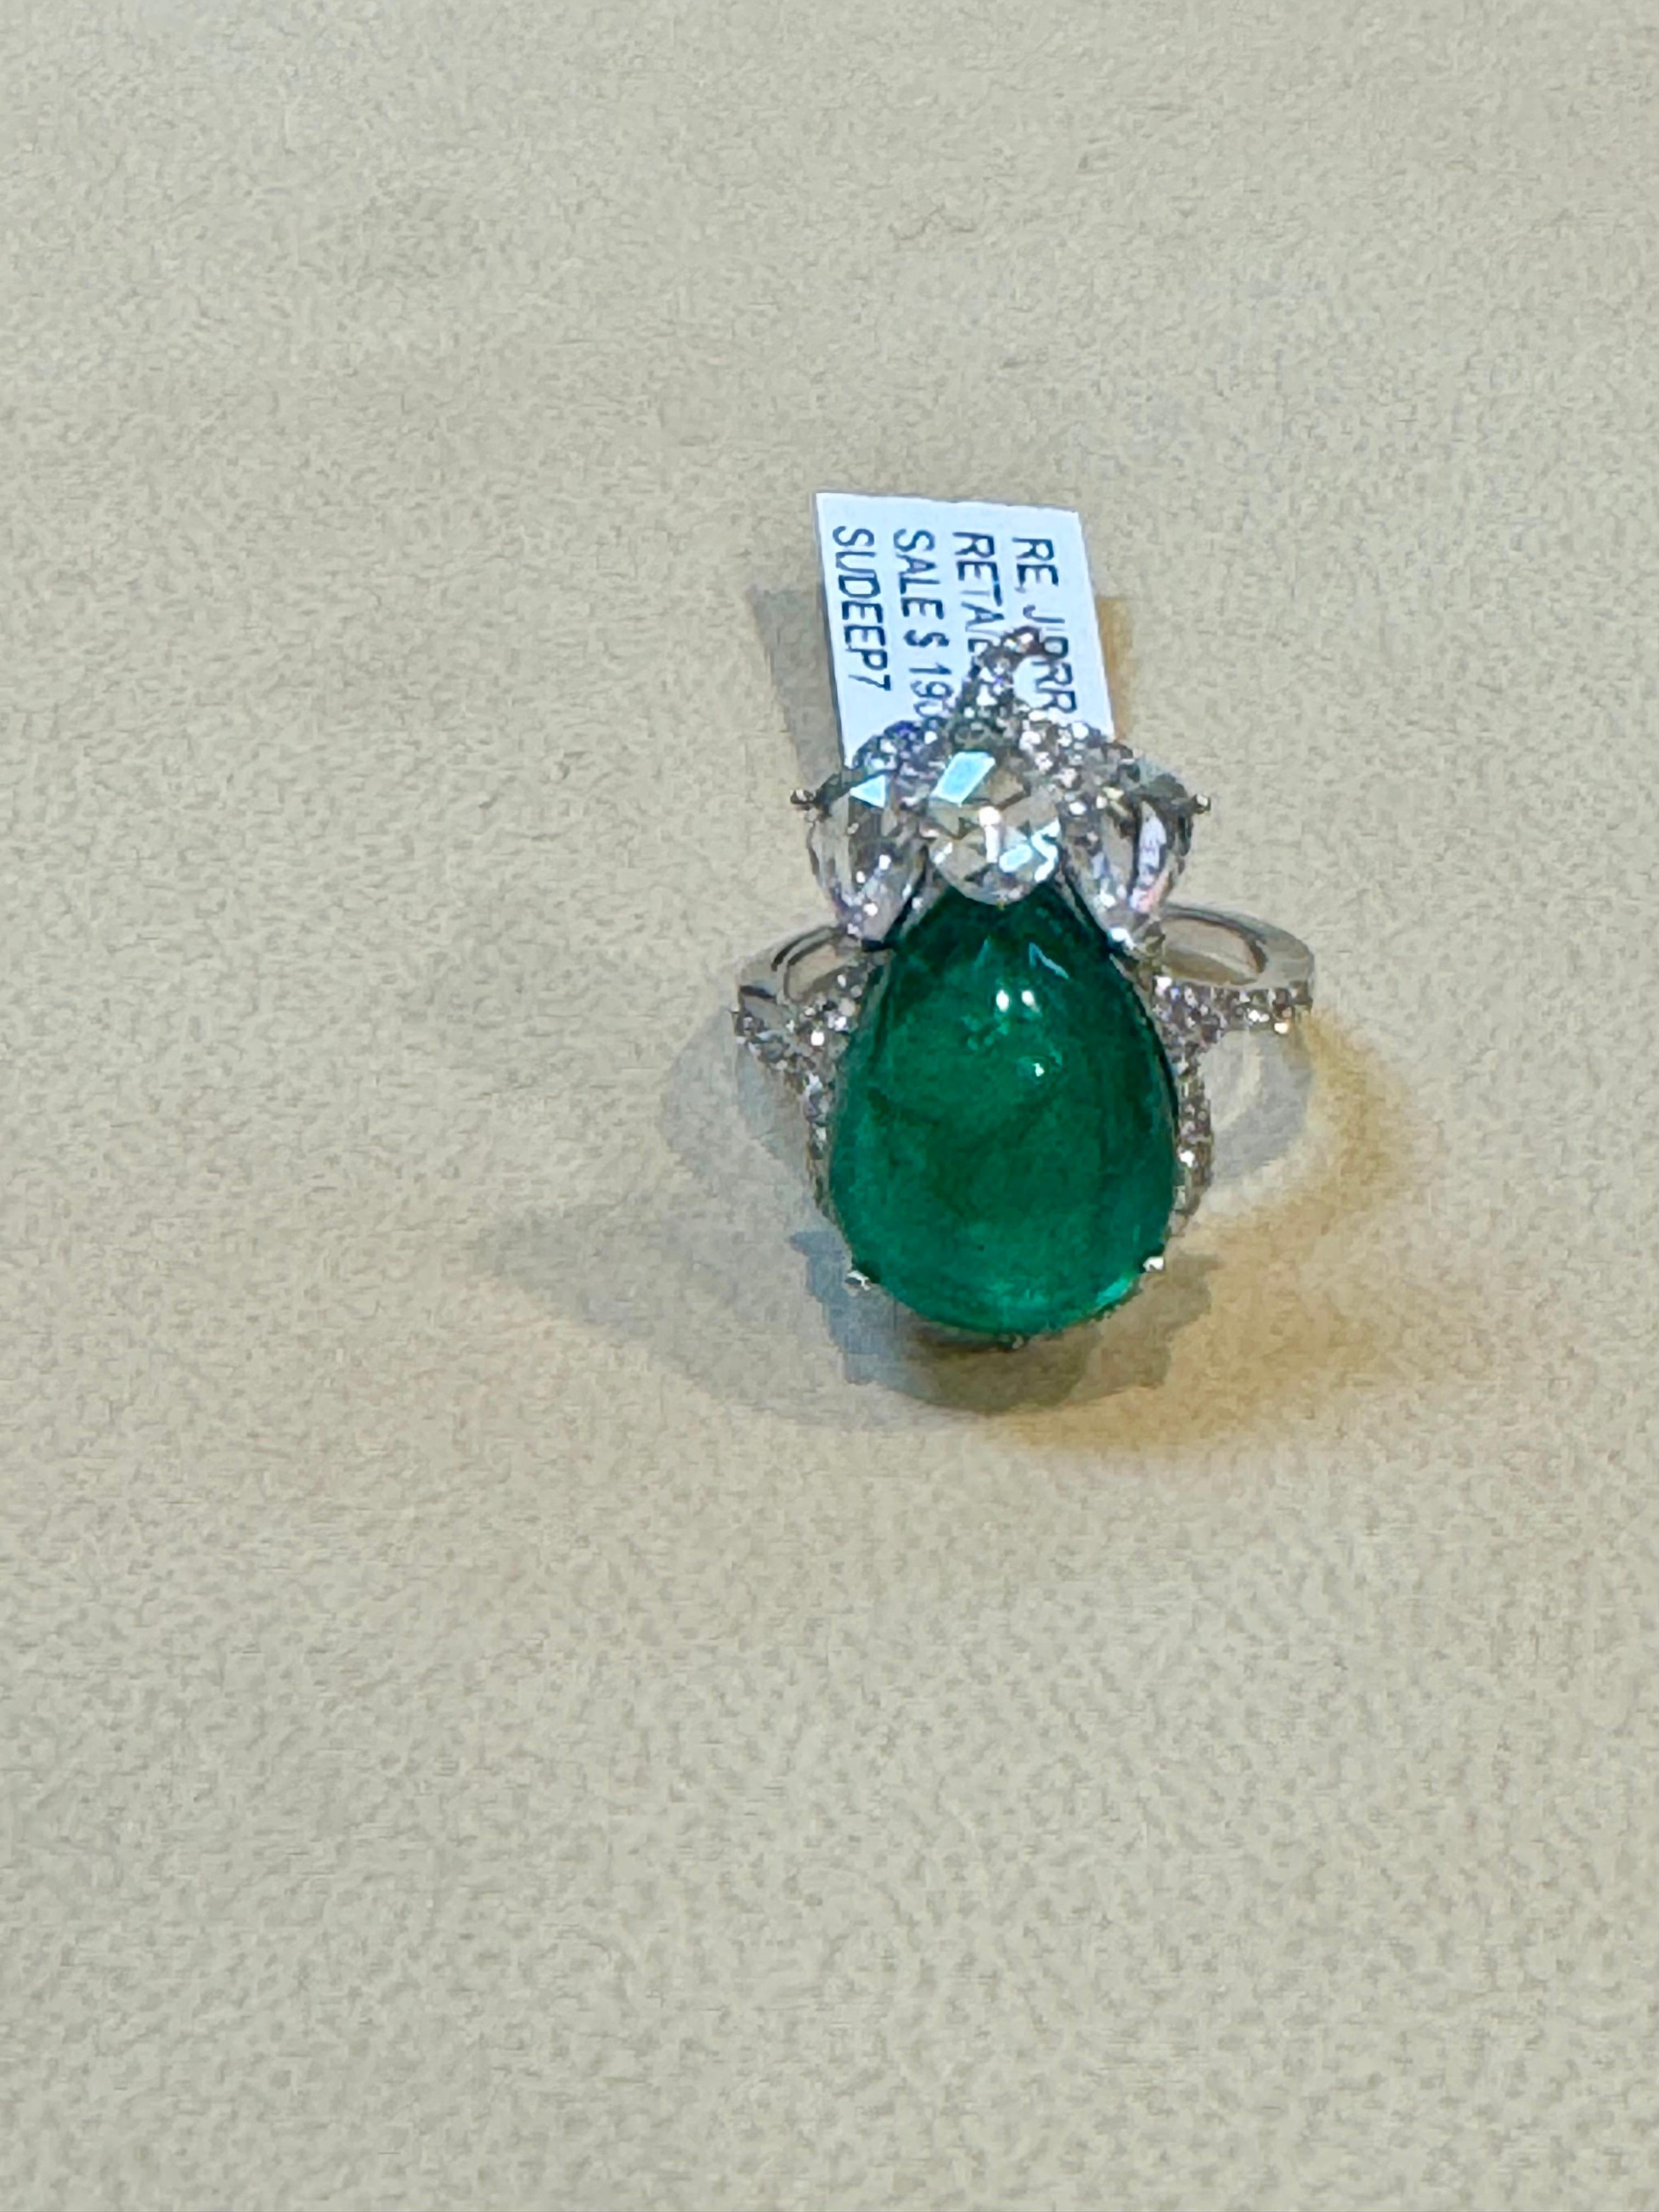 9 Ct Finest Zambian Sugar Loaf Emerald & 2 Ct Rose Cut Diamond Ring Size 7 For Sale 2